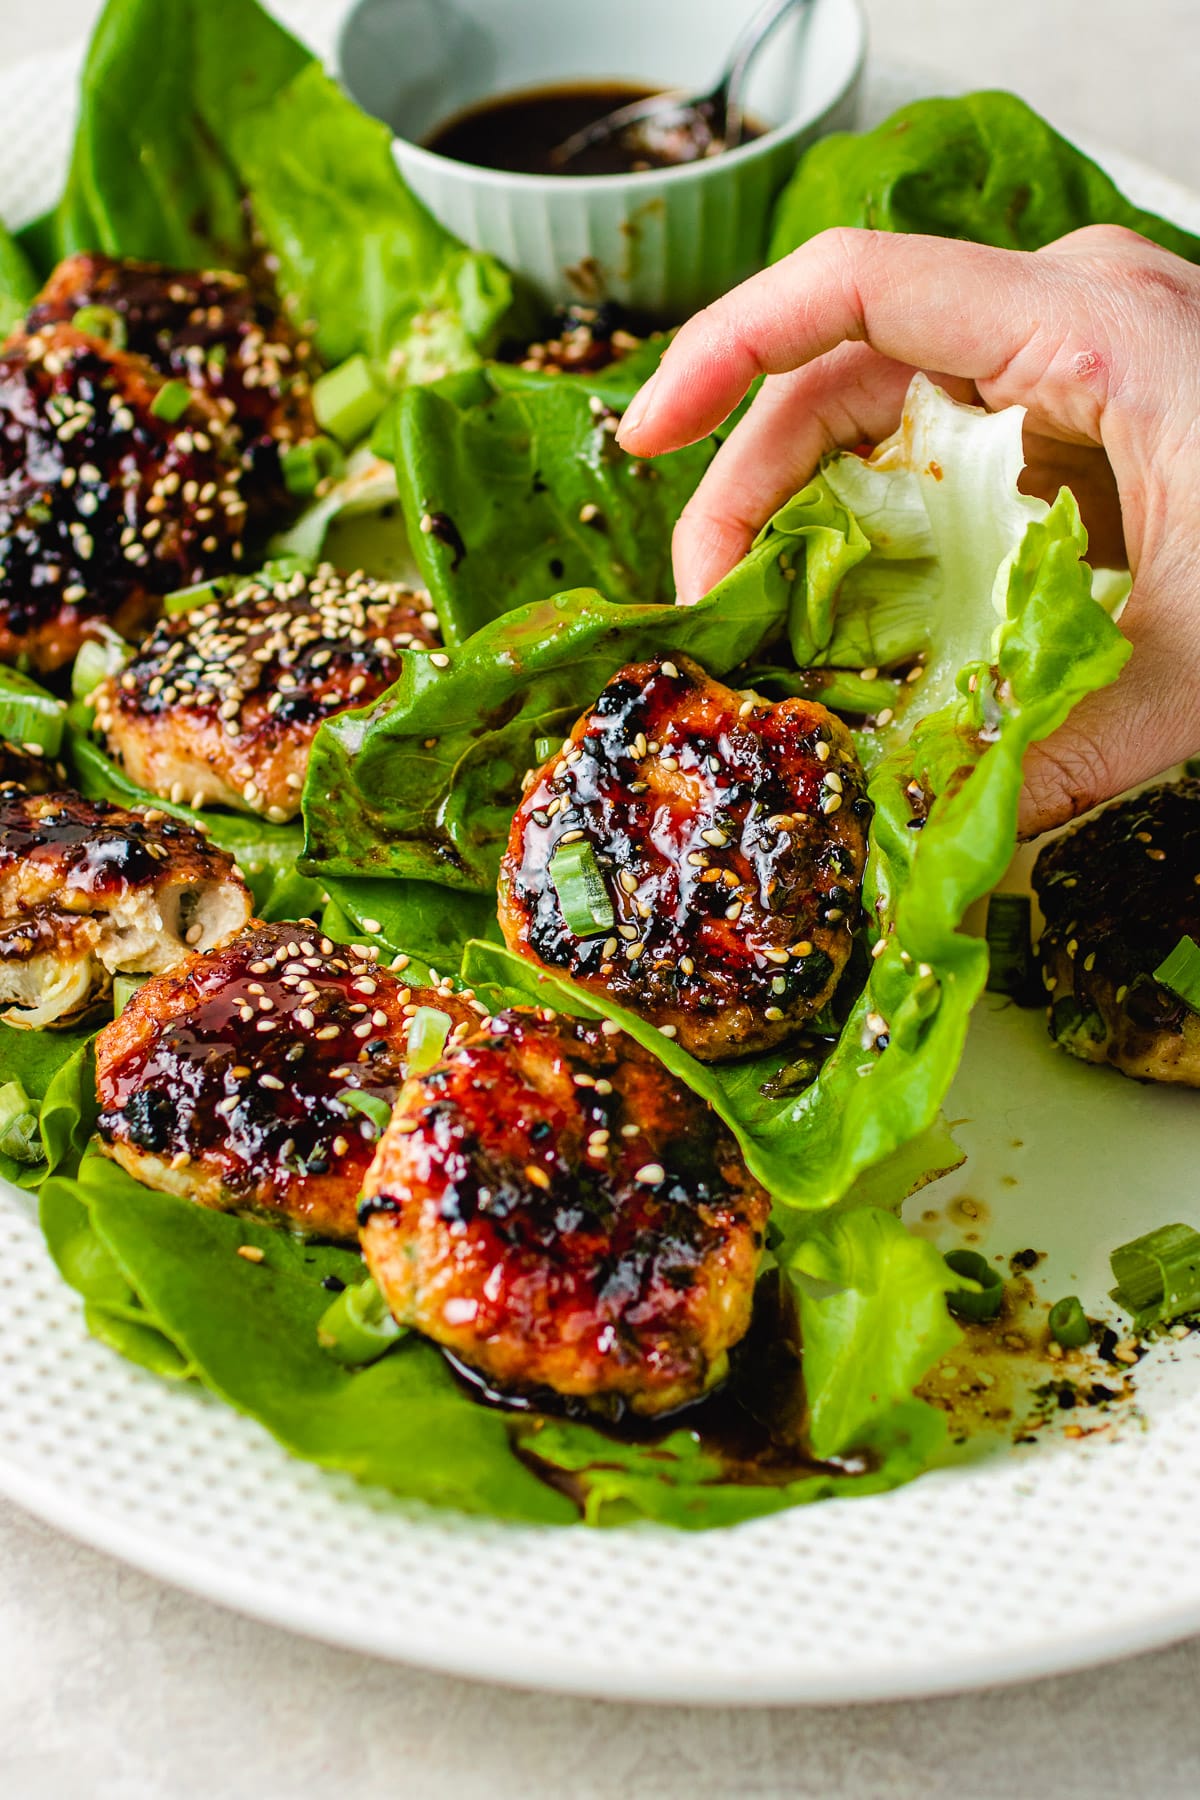 Tsukune meatballs served with lettuce wraps and brushed with yakitori sauce.